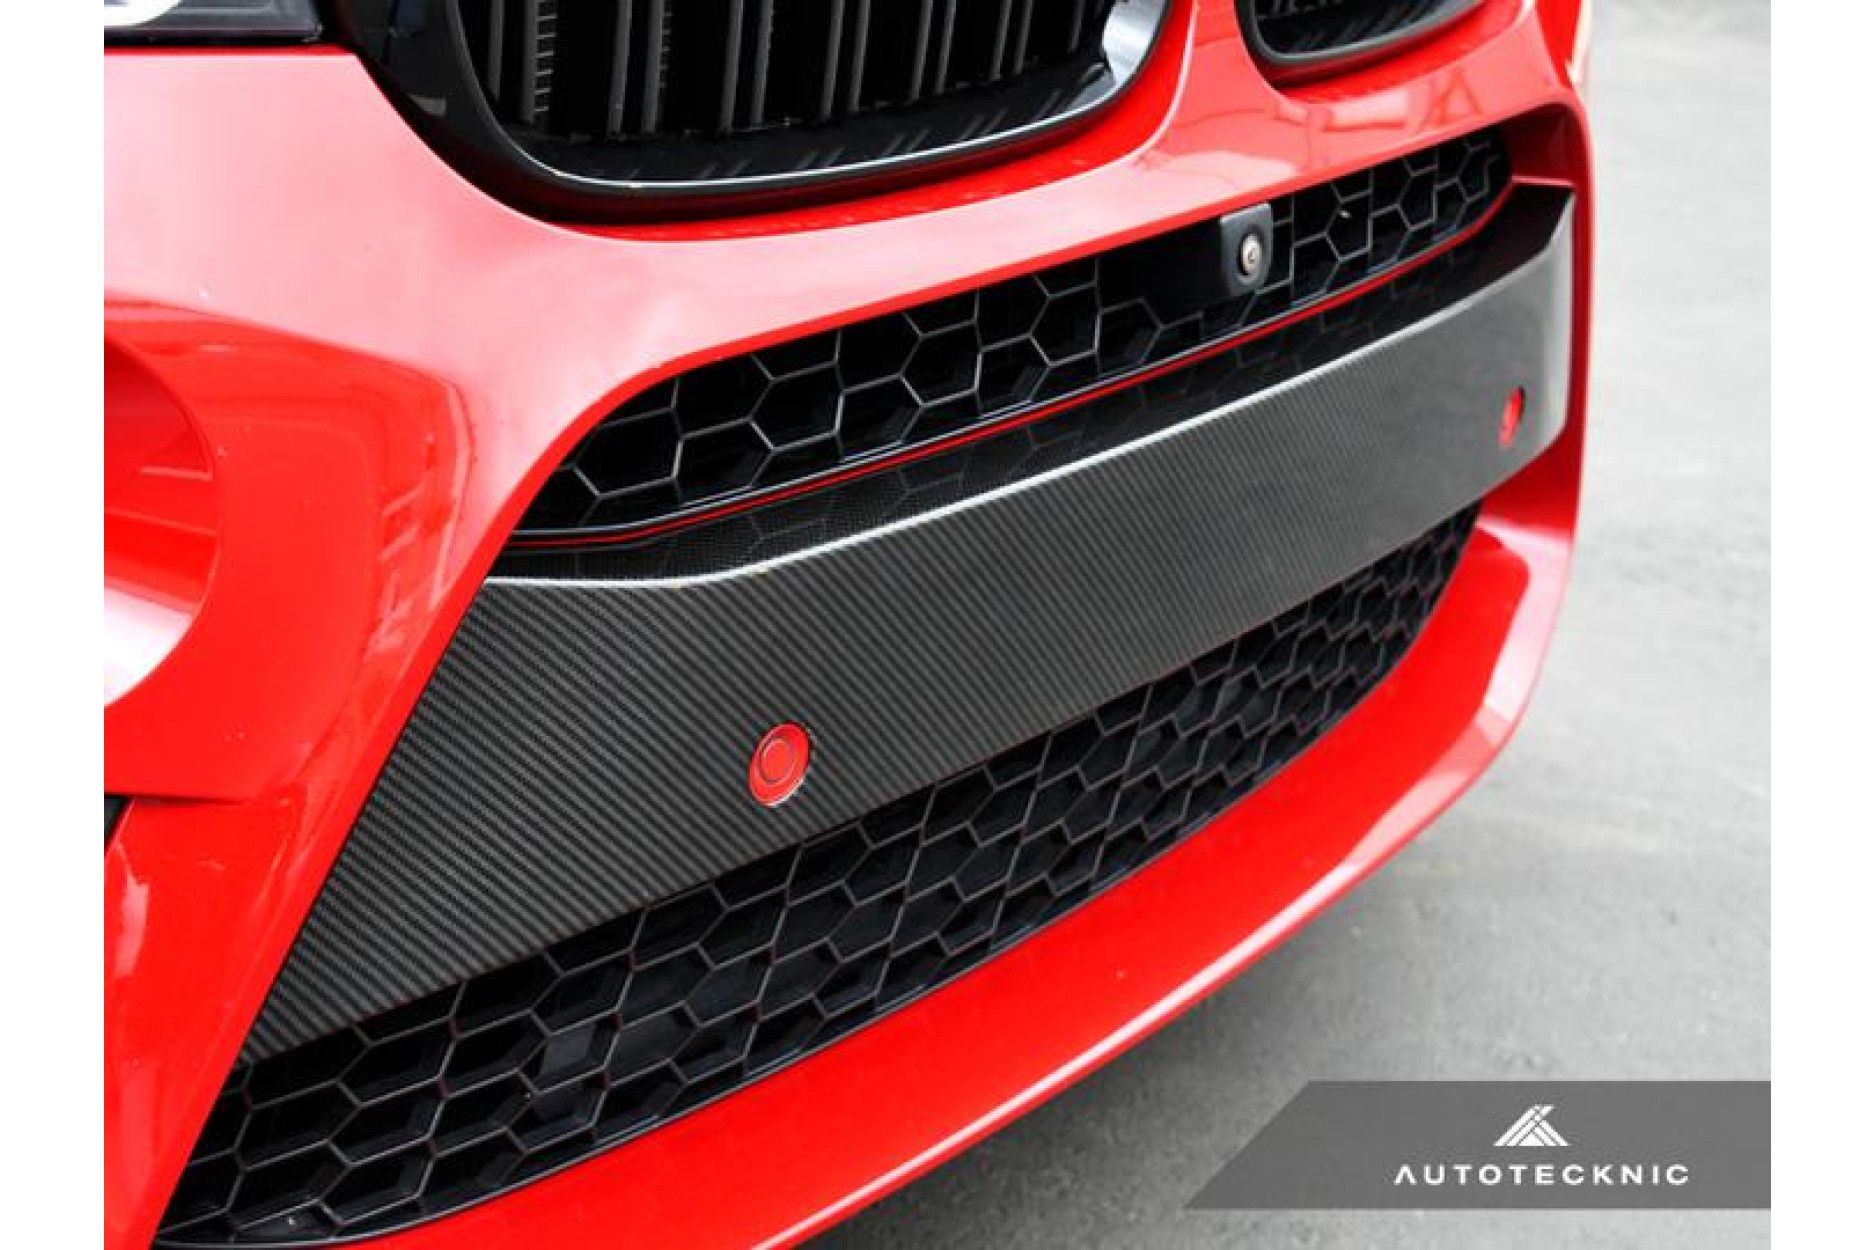 Autotecknic Carbon Frontcover for BMW F85 X5M and F86 X6M